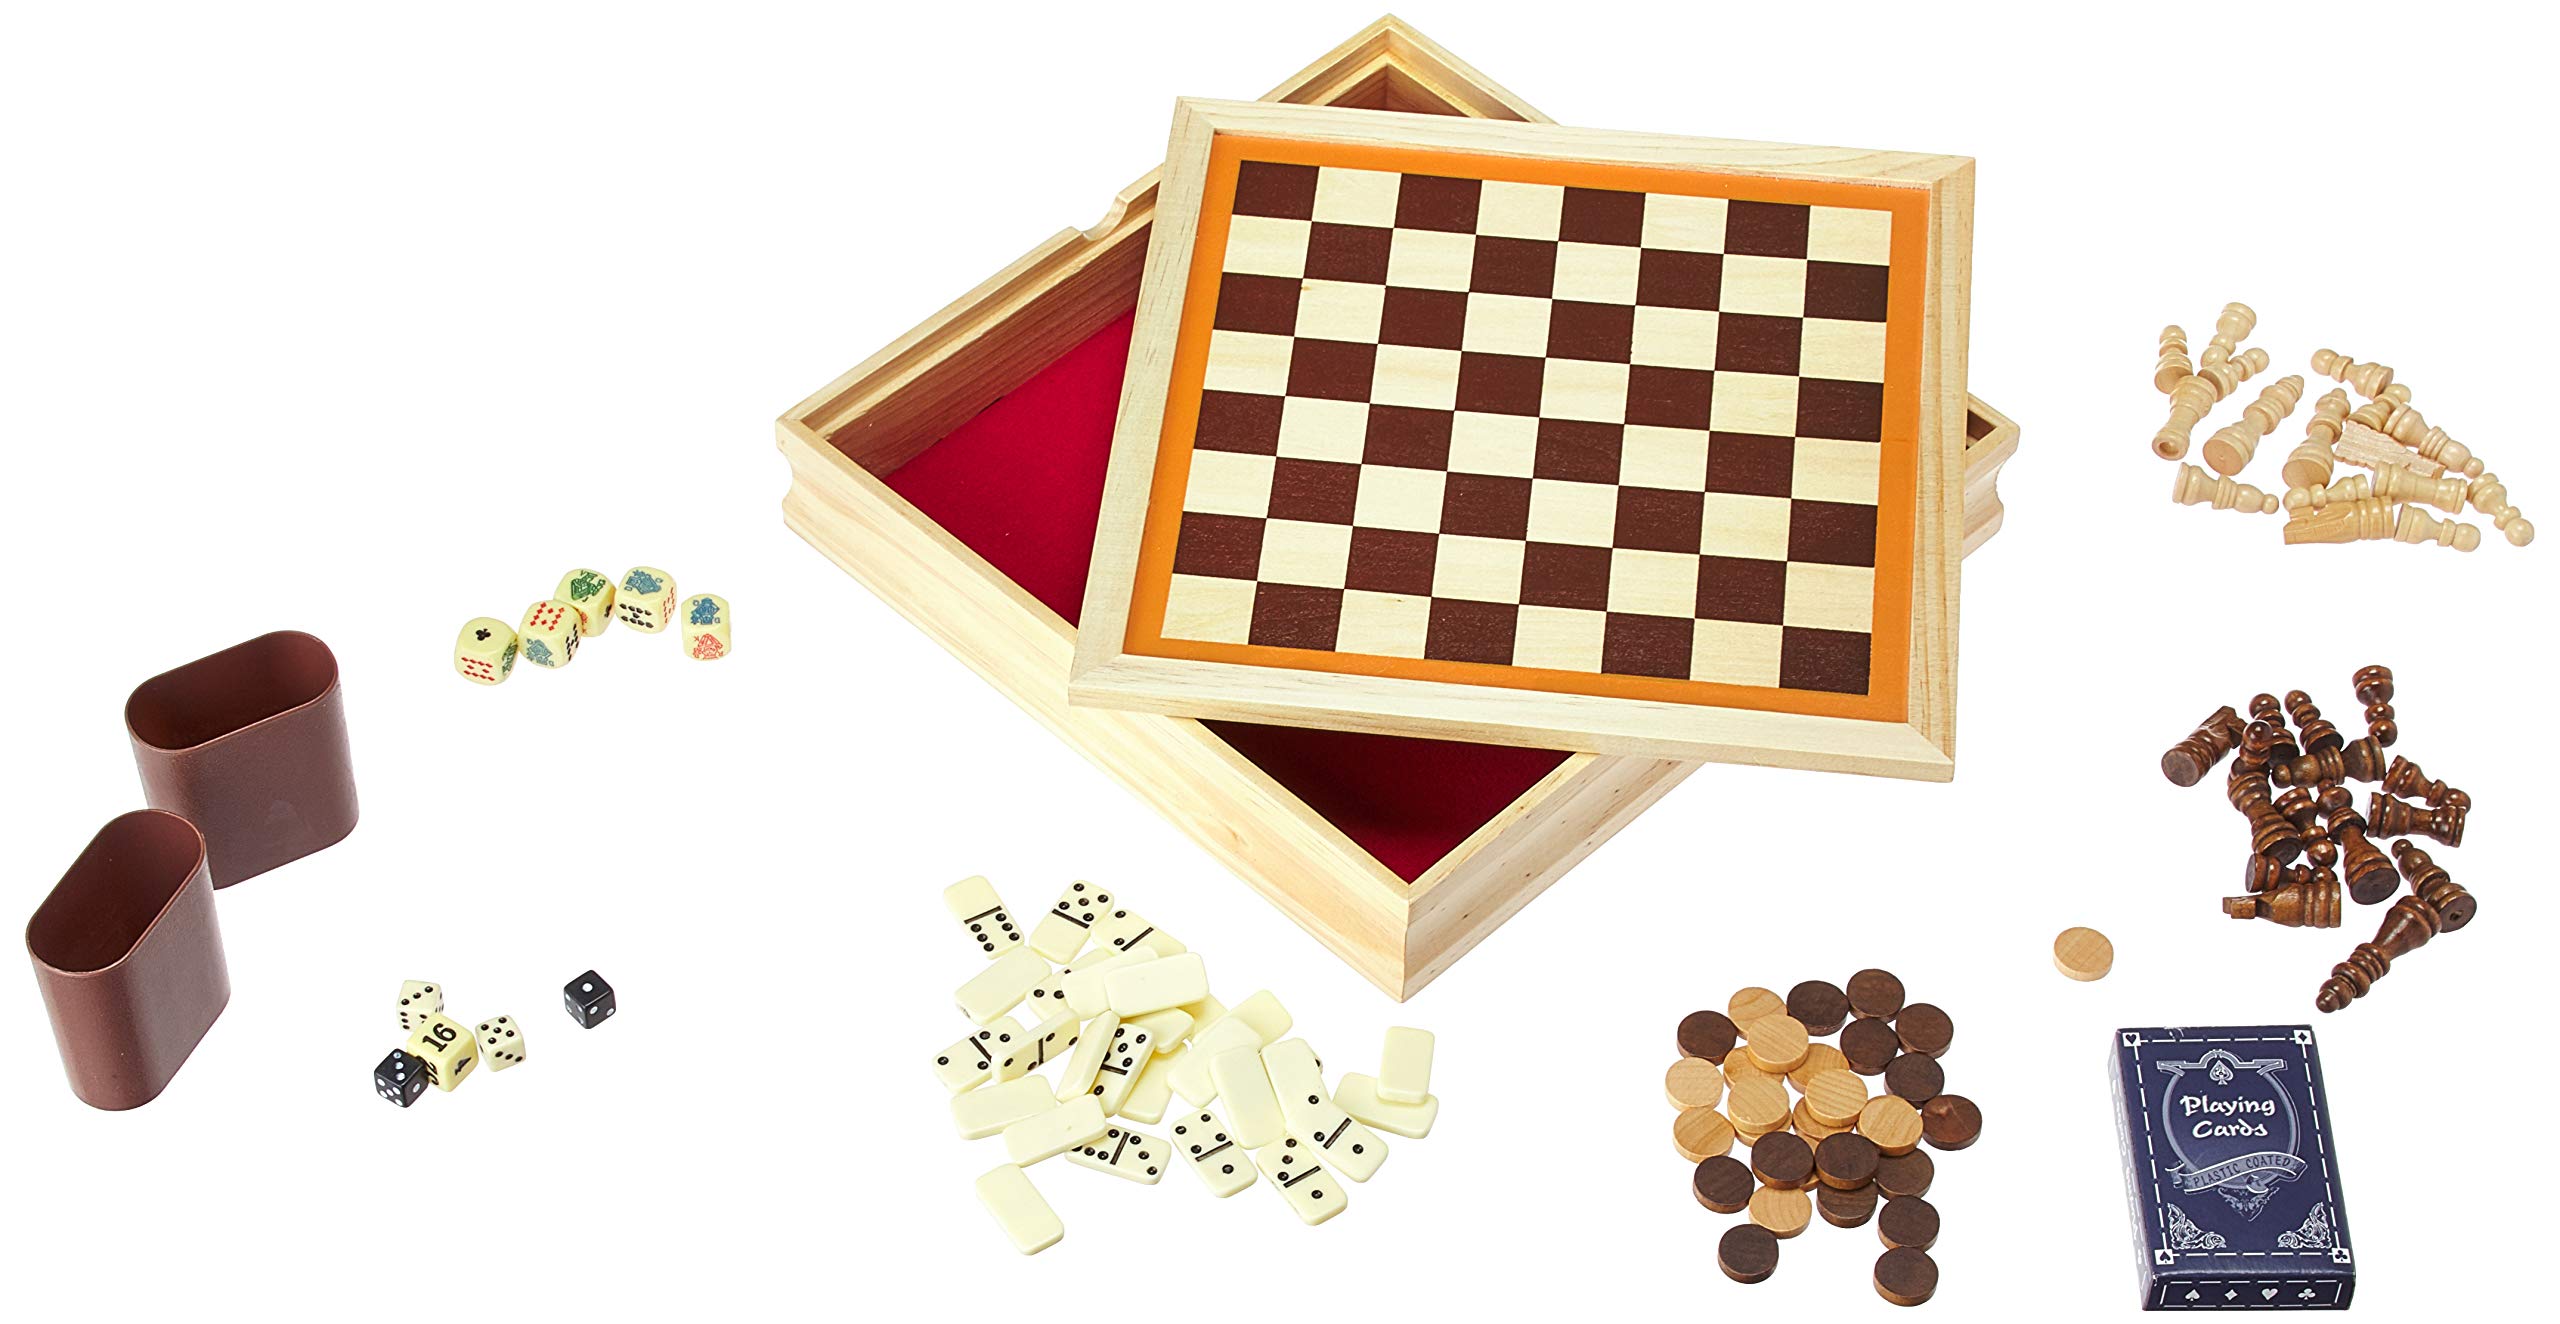 GREAT 6 - IN - 1 GAME SET: Chess, Checkers, Backgammon, Poker Dice, Dominoes, and Playing Cards!